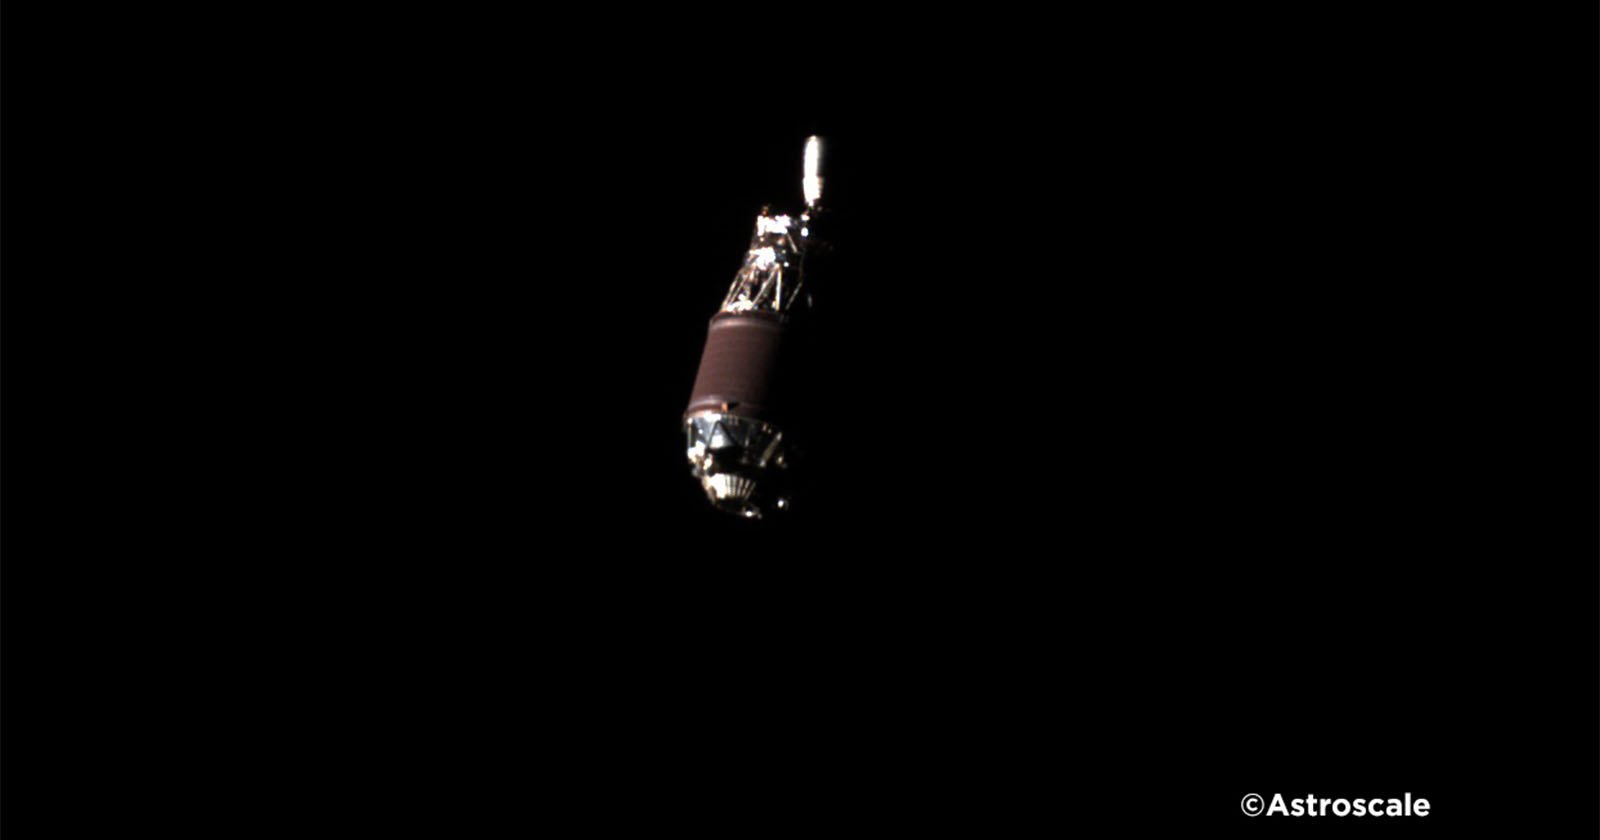 ADRAS-J Captures First Image of Space Debris: A Crucial Step Towards Orbit Cleanup